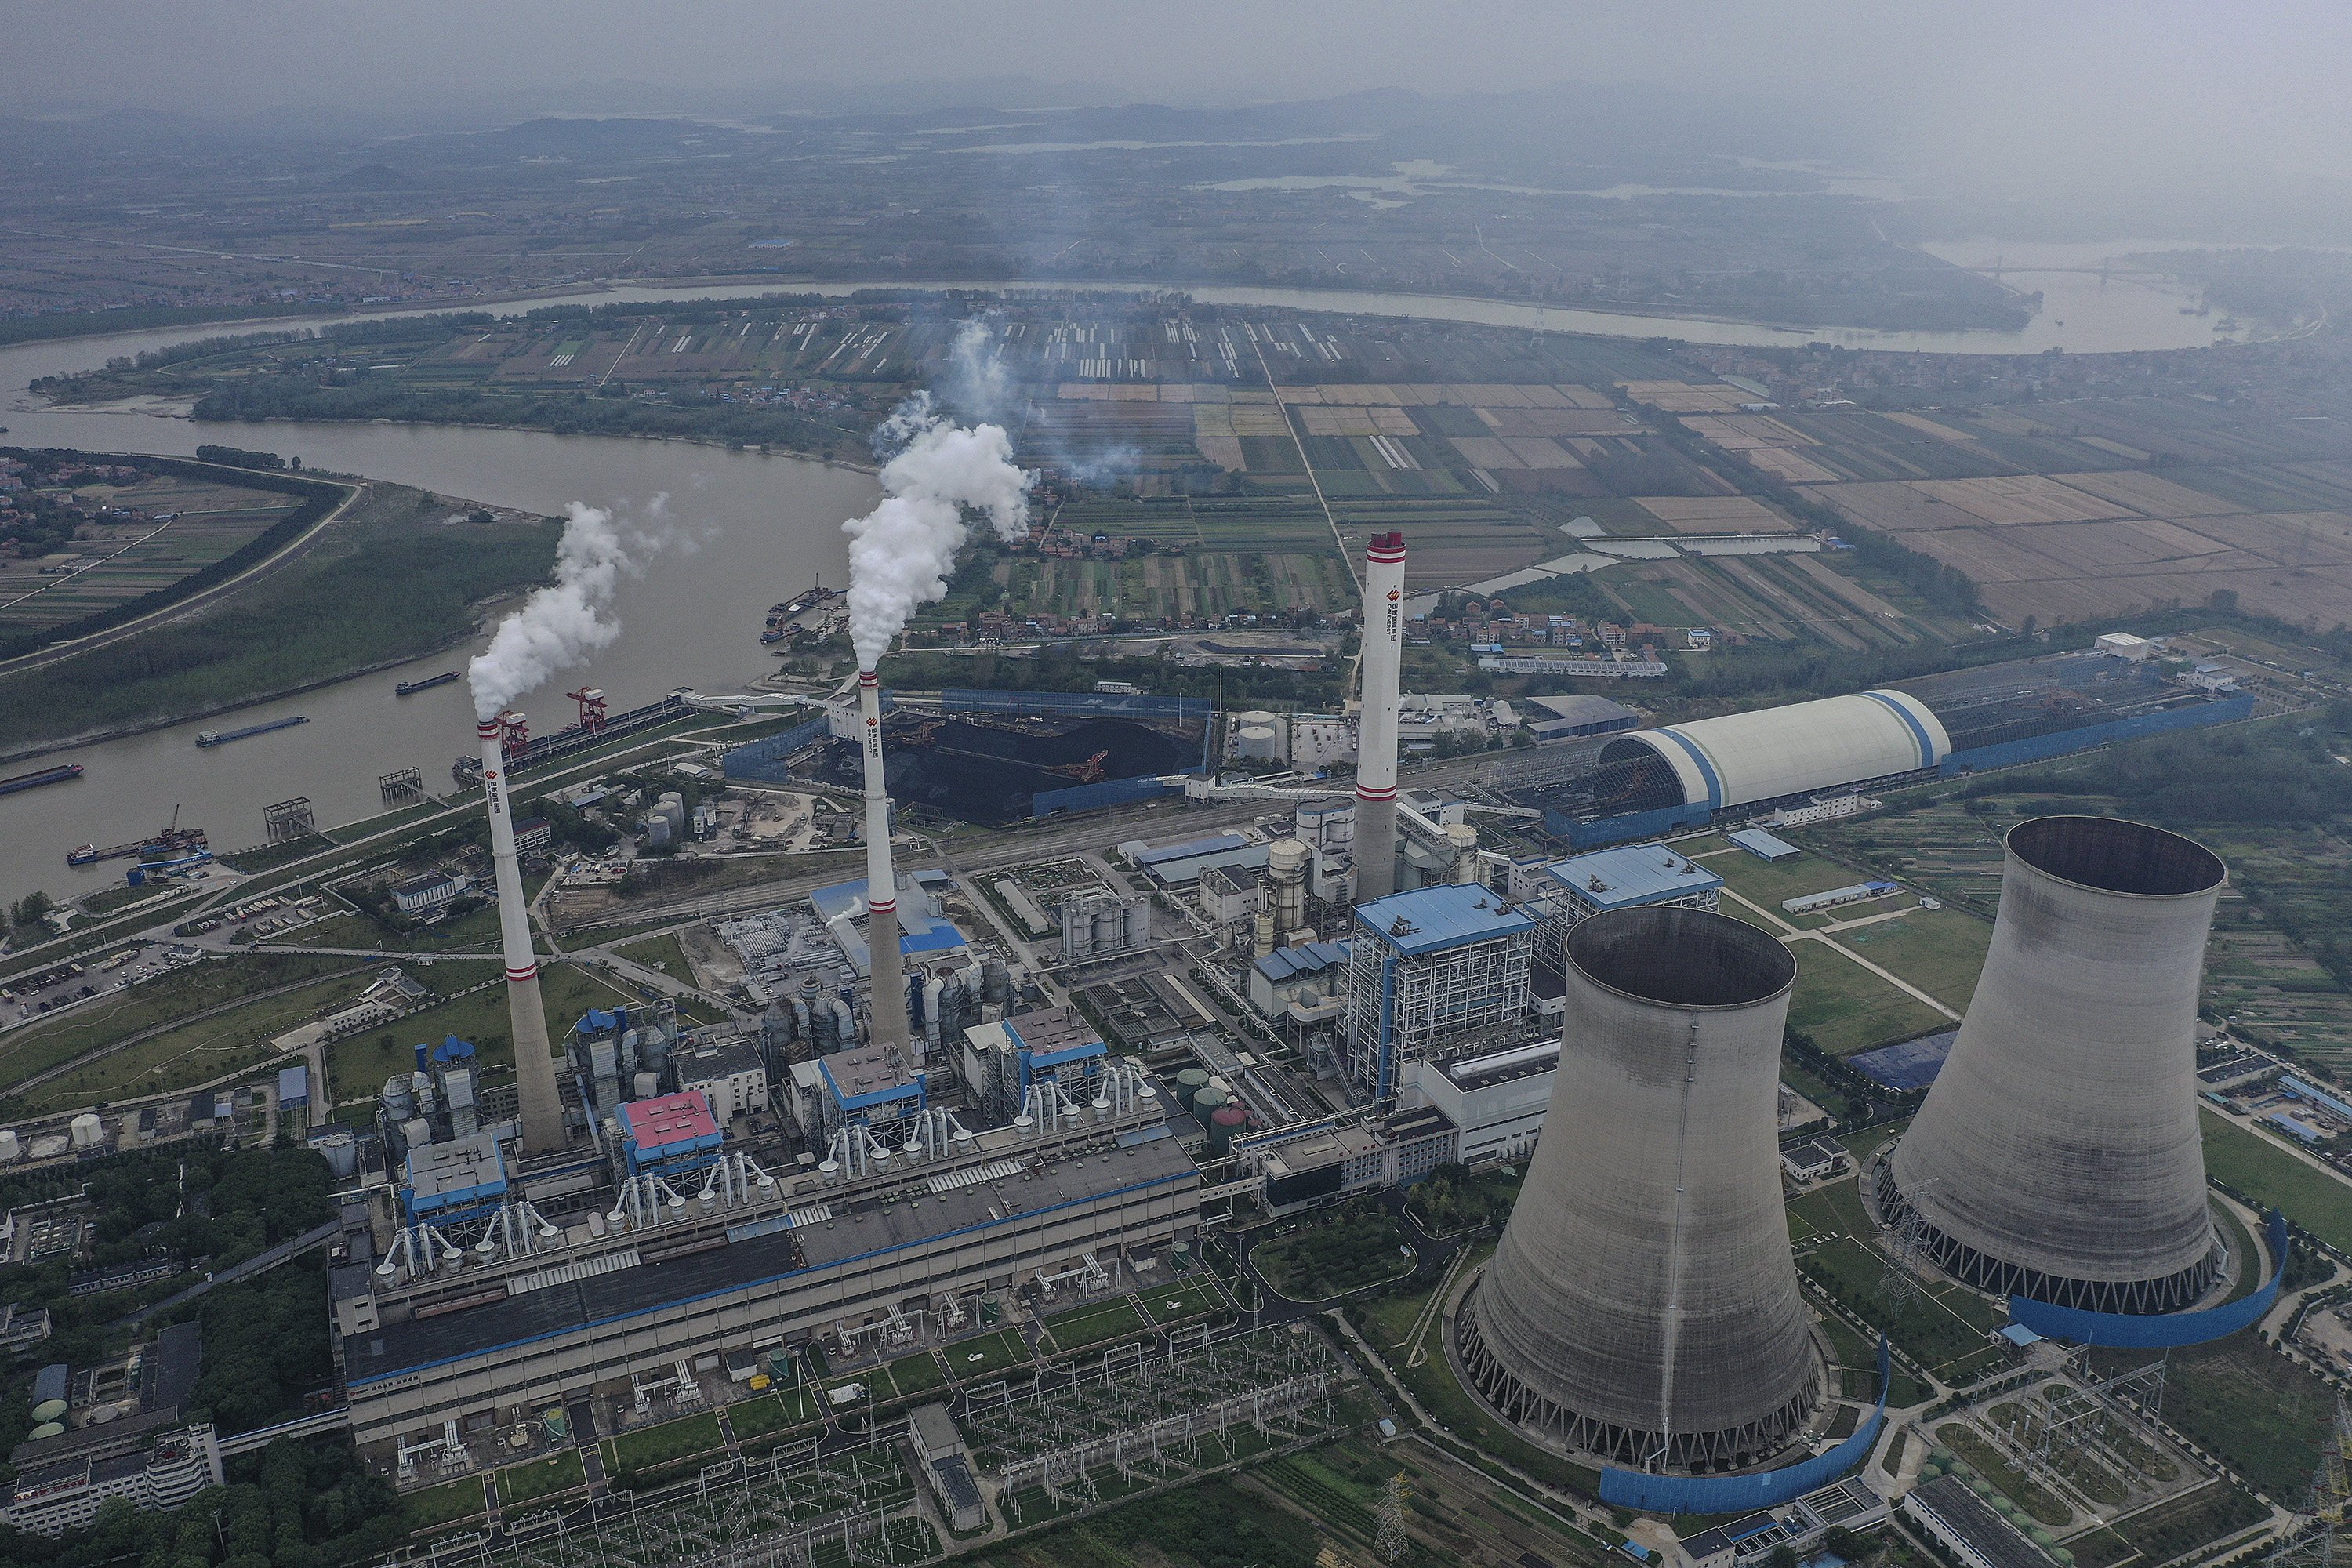 An aerial view of a coal-fired power plant in Hanchuan, Hubei province, on October 13, 2021. Photo: Getty Images